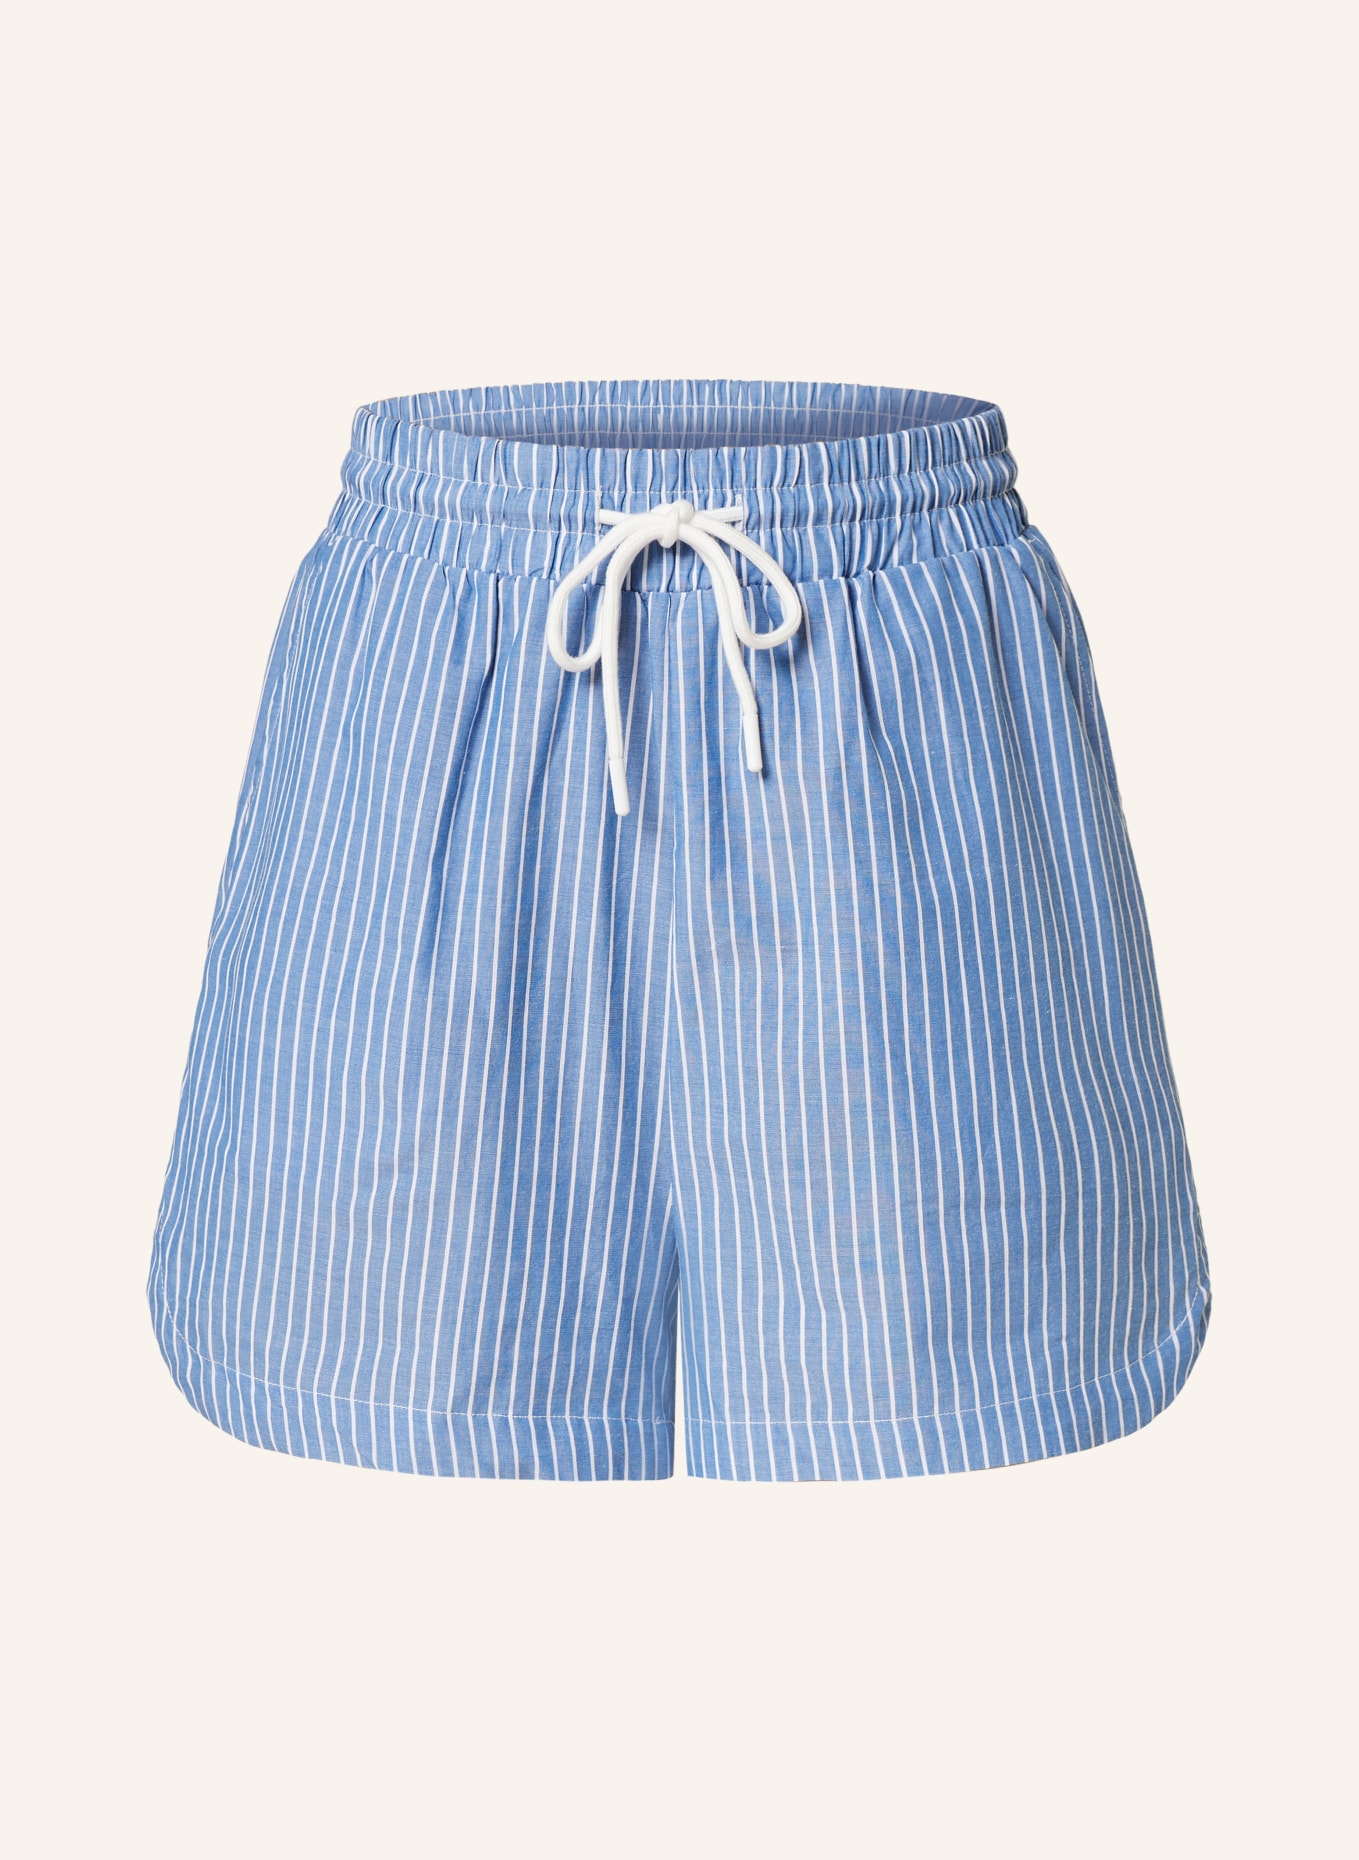 ONLY Shorts, Color: LIGHT BLUE/ WHITE (Image 1)